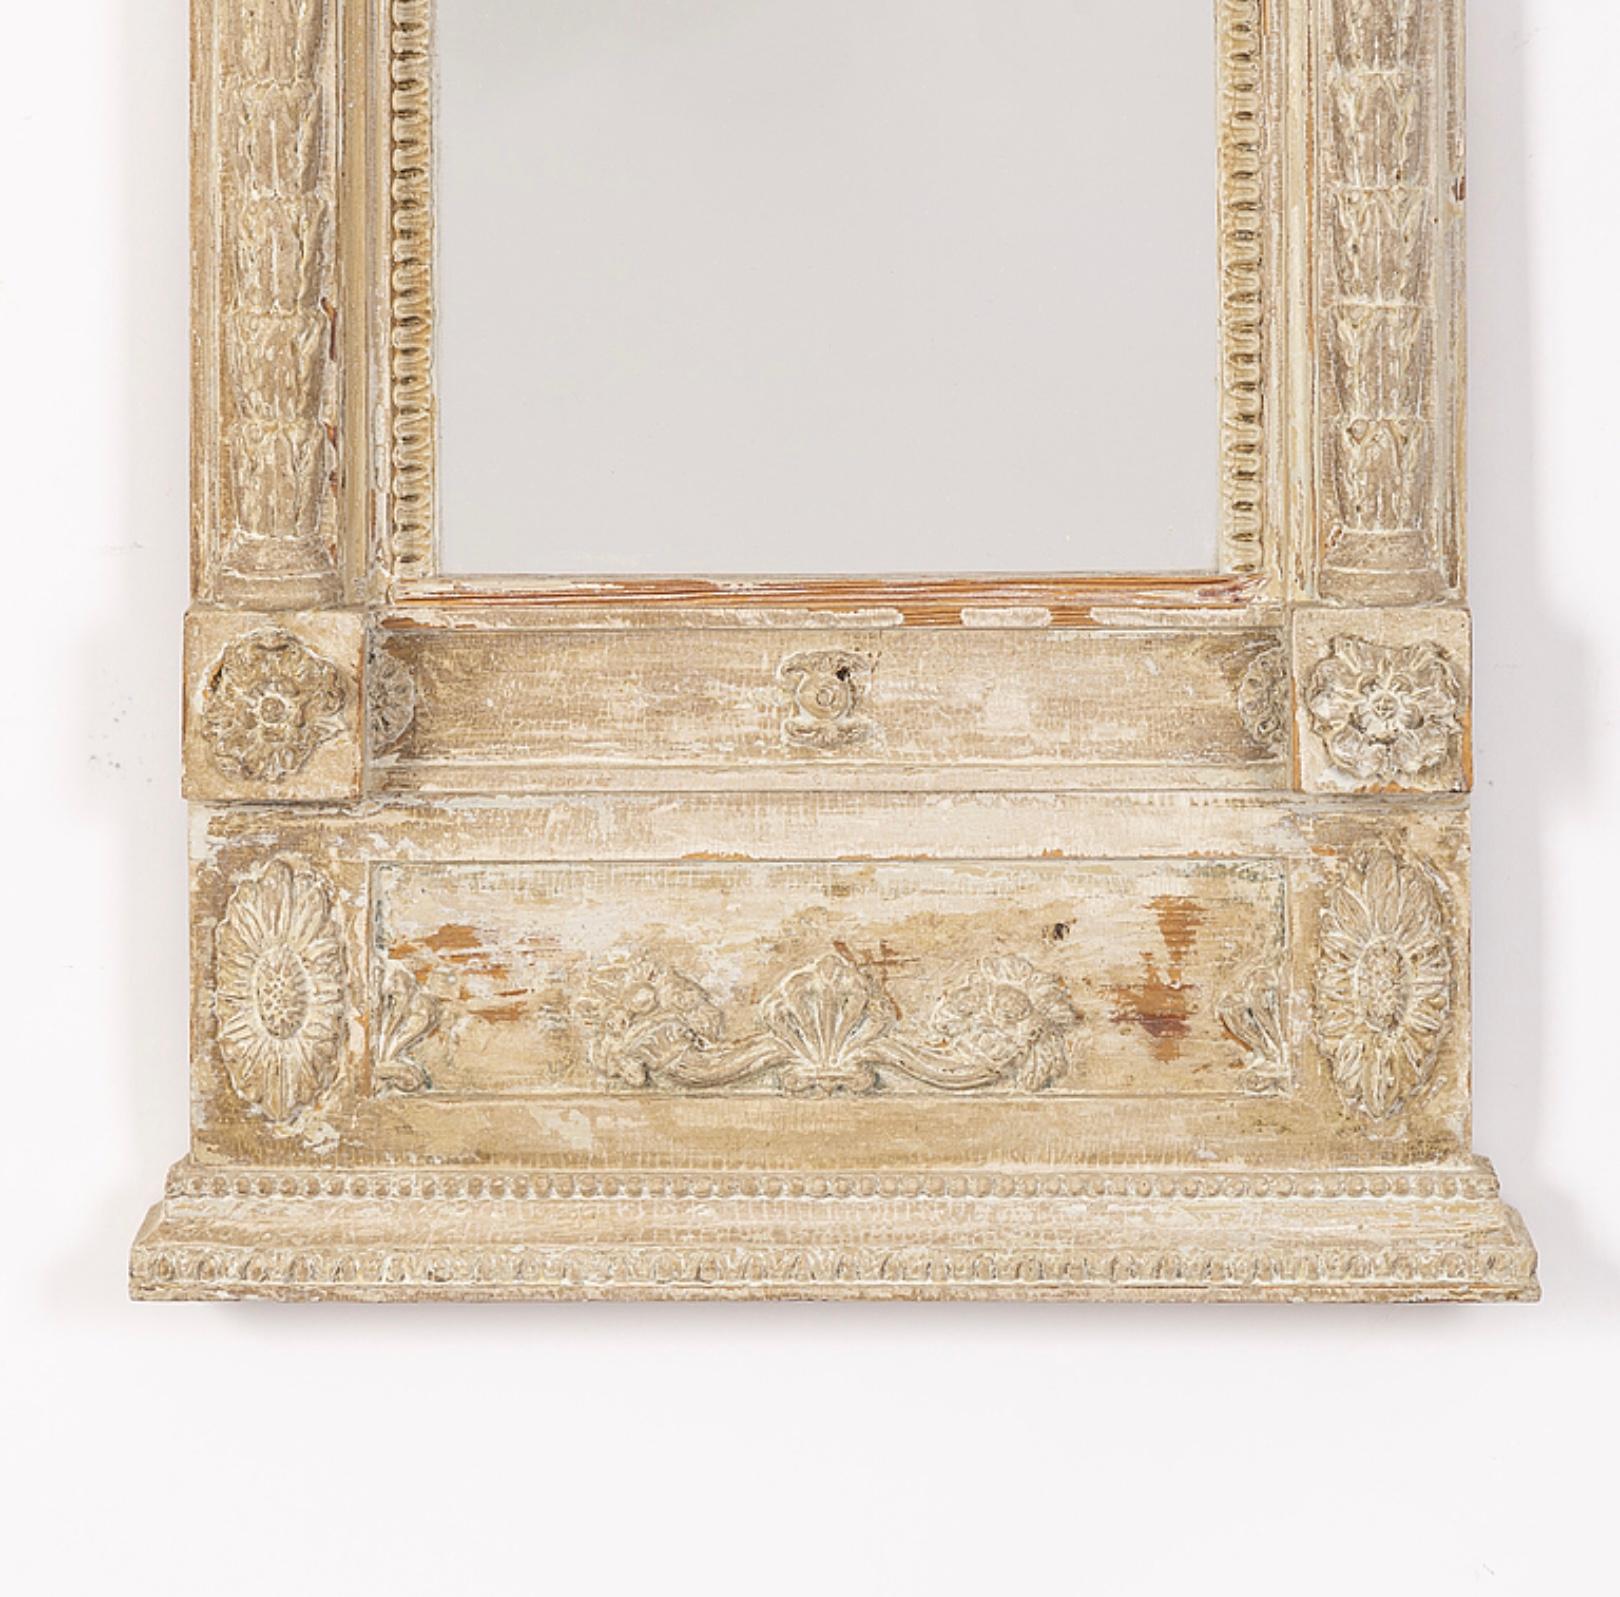 Circa 1820s Swedish Stripped Wood Empire Classical Style Wall Mirror  For Sale 2